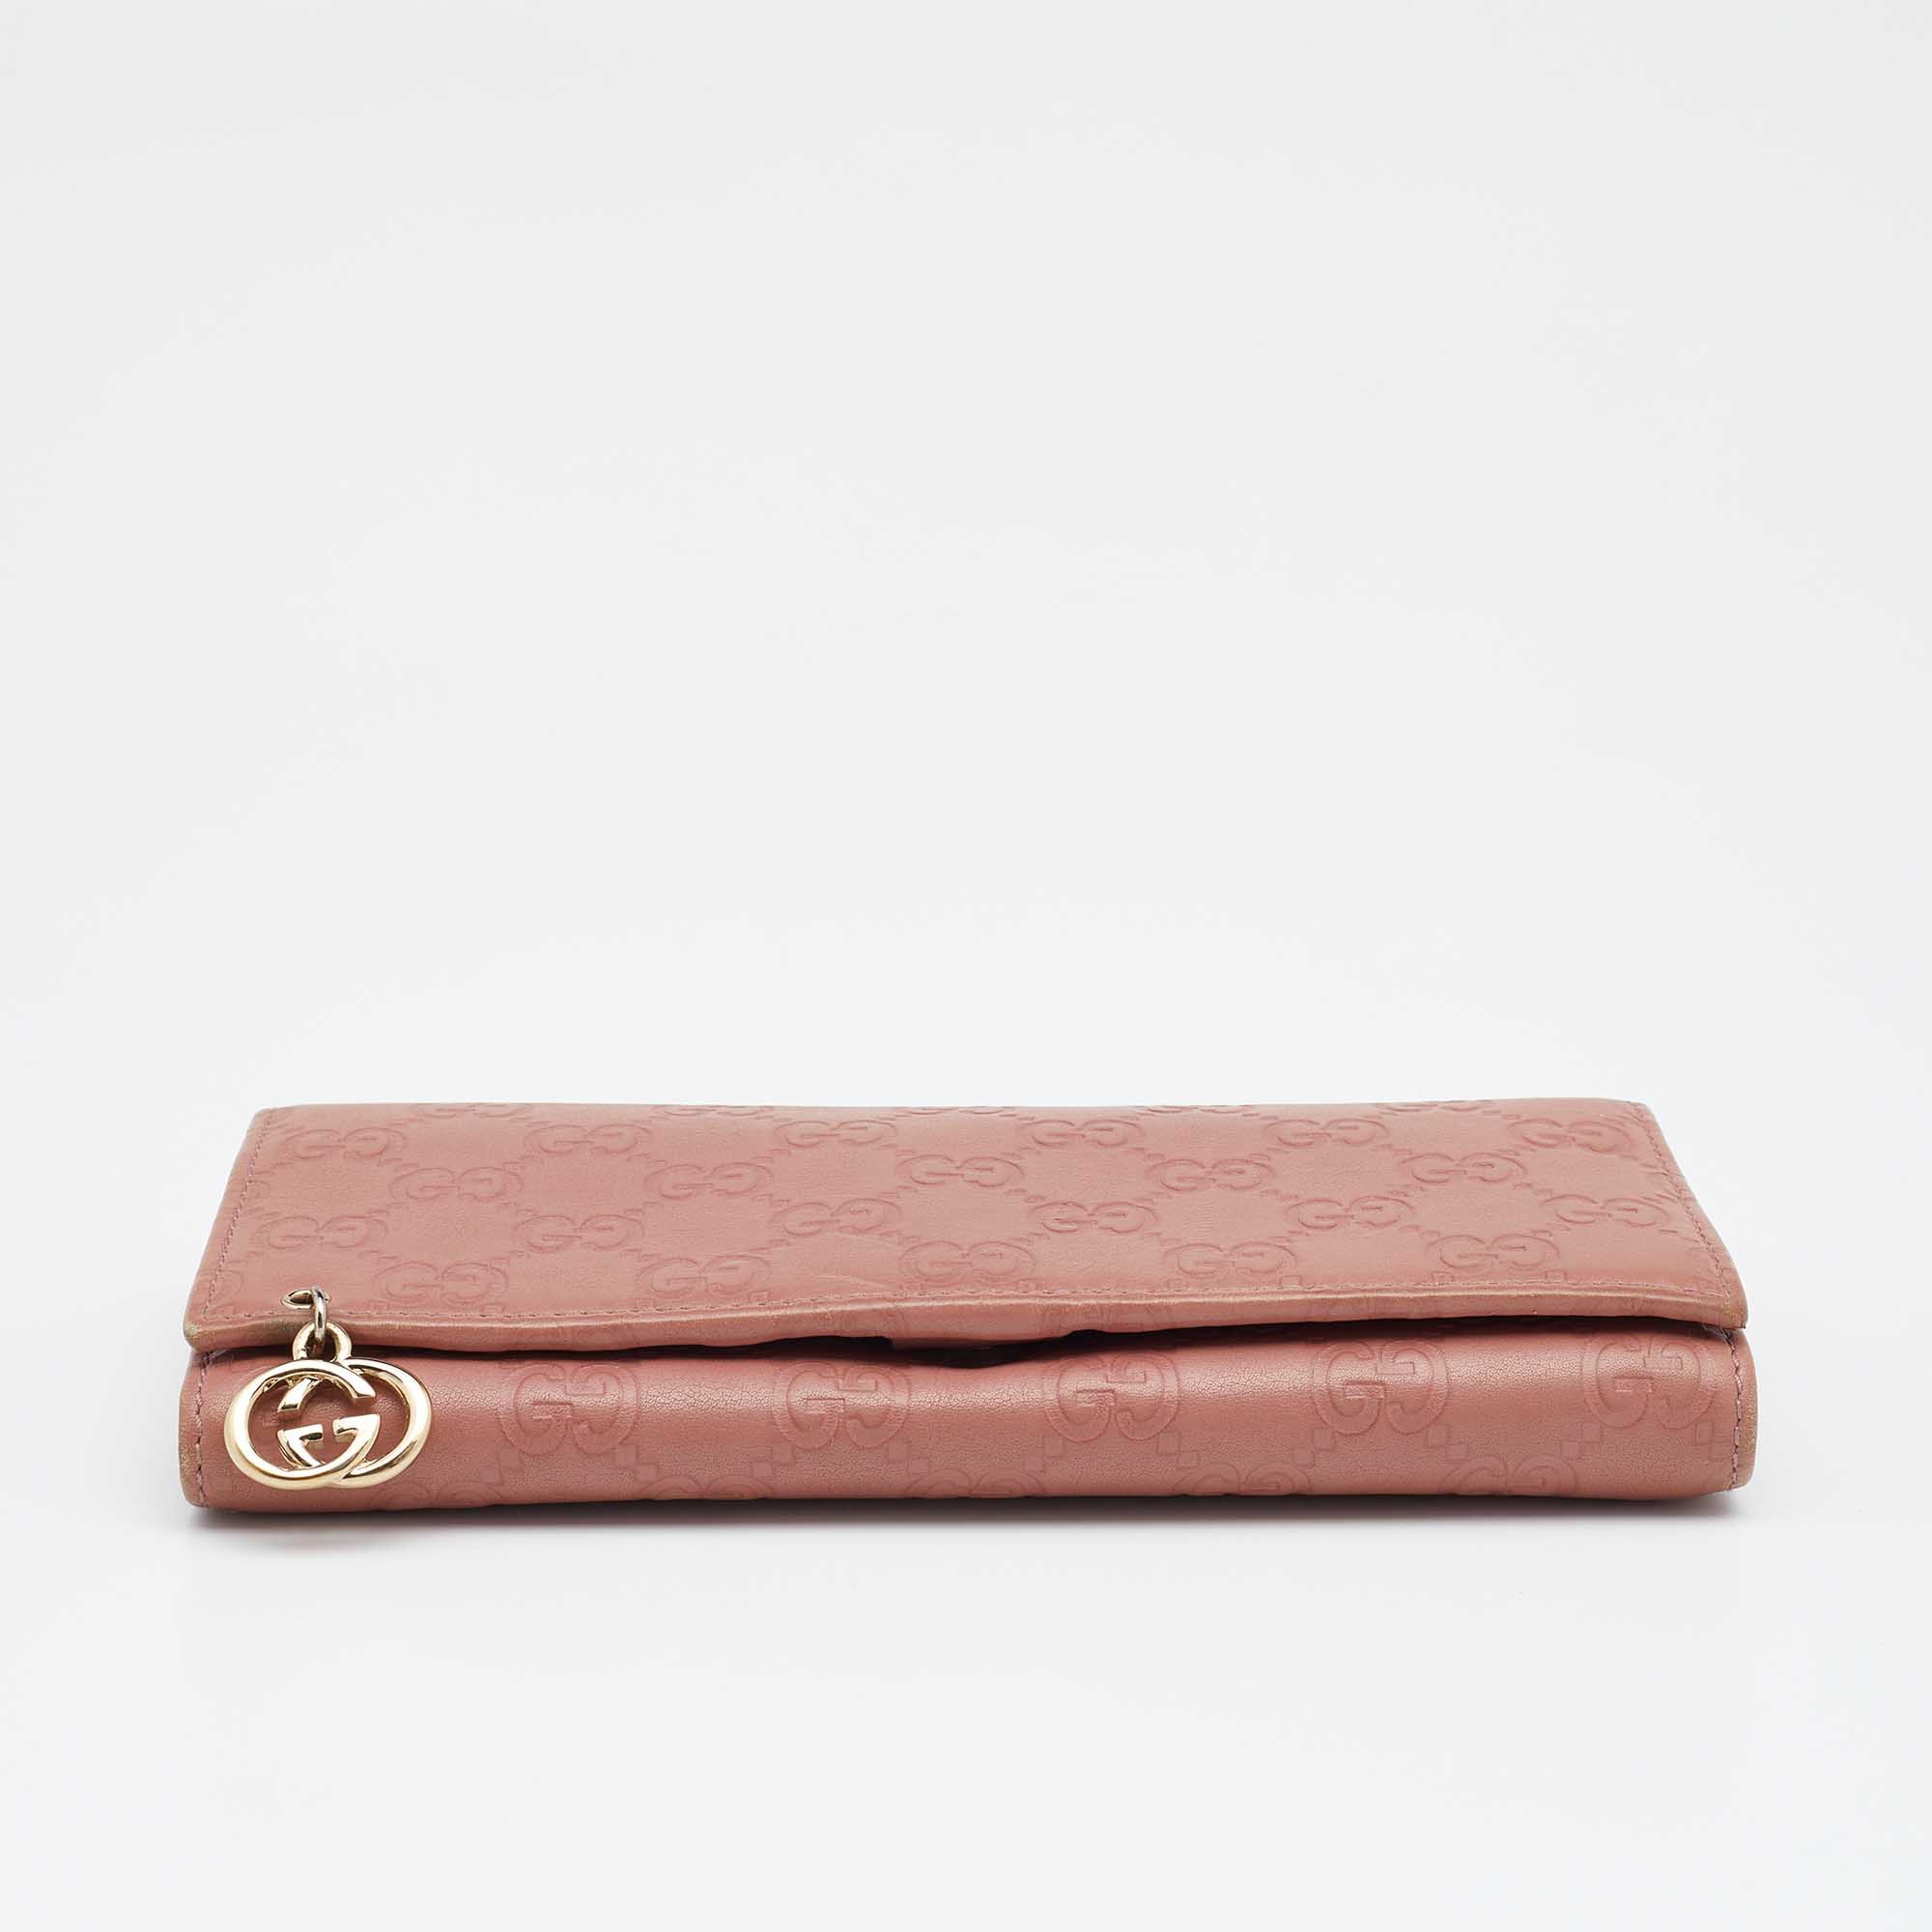 Gucci Pink Guccissima Leather Interlocking G Continental Wallet